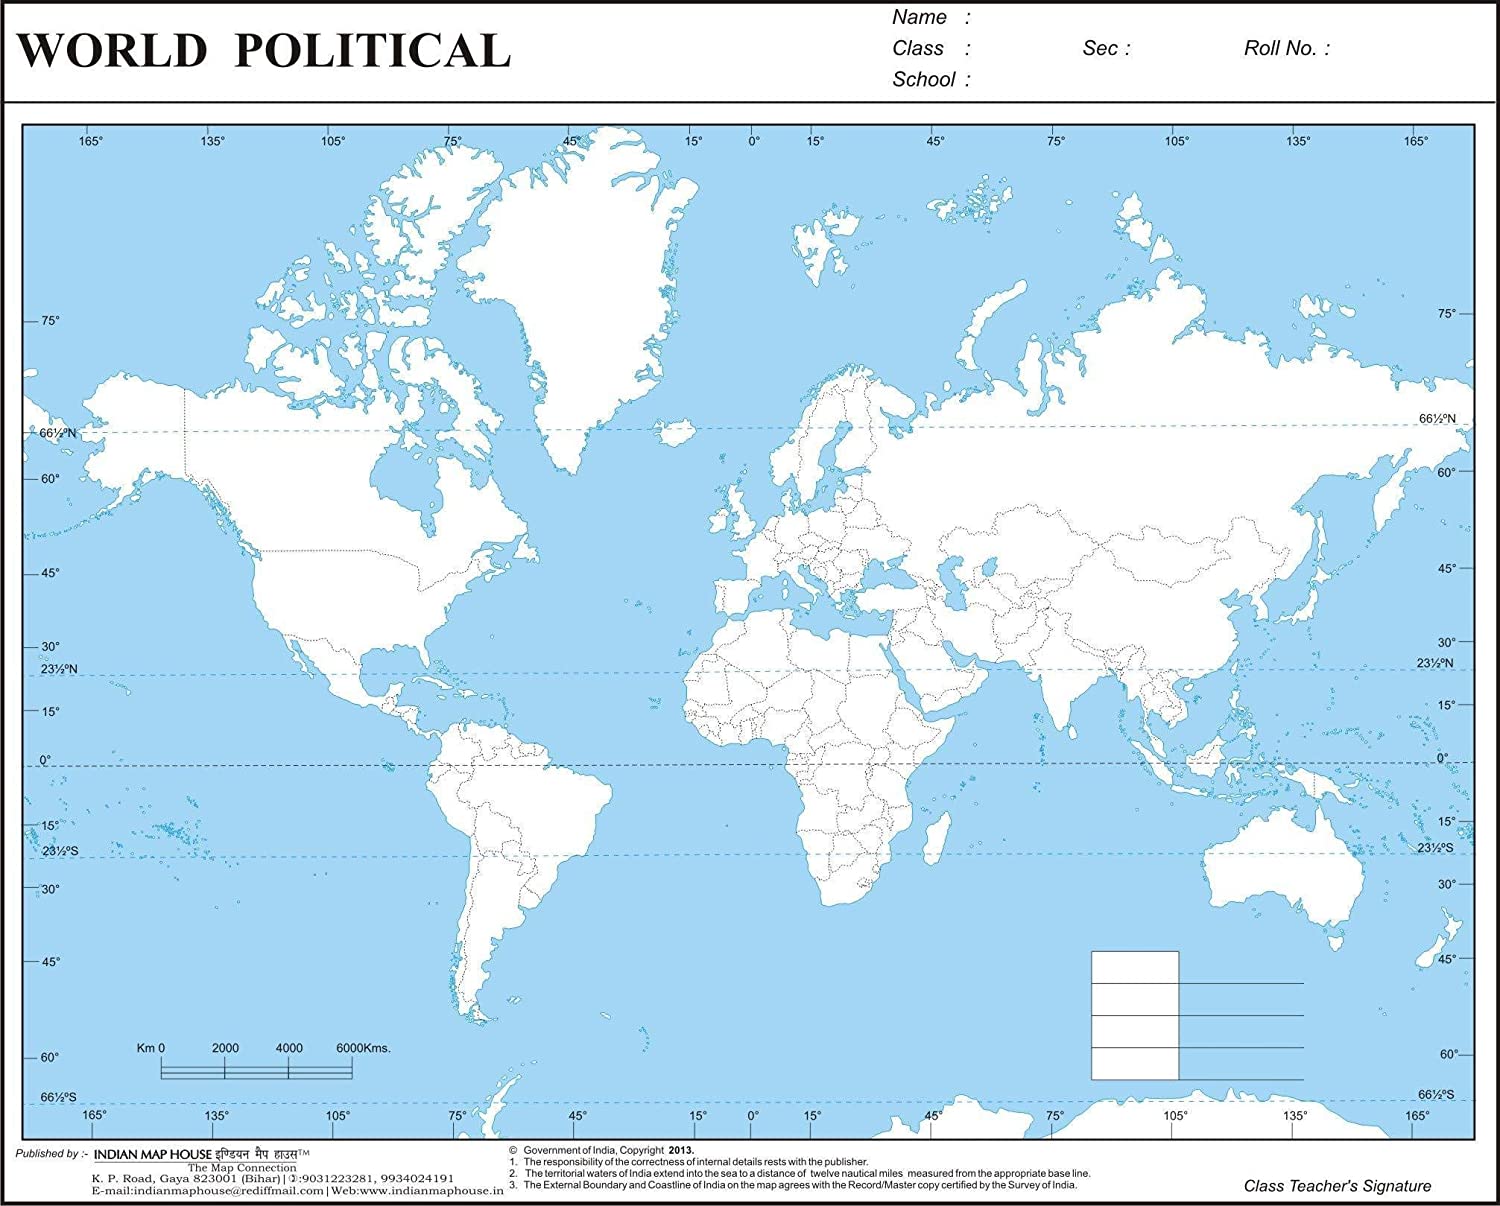 world map outlines